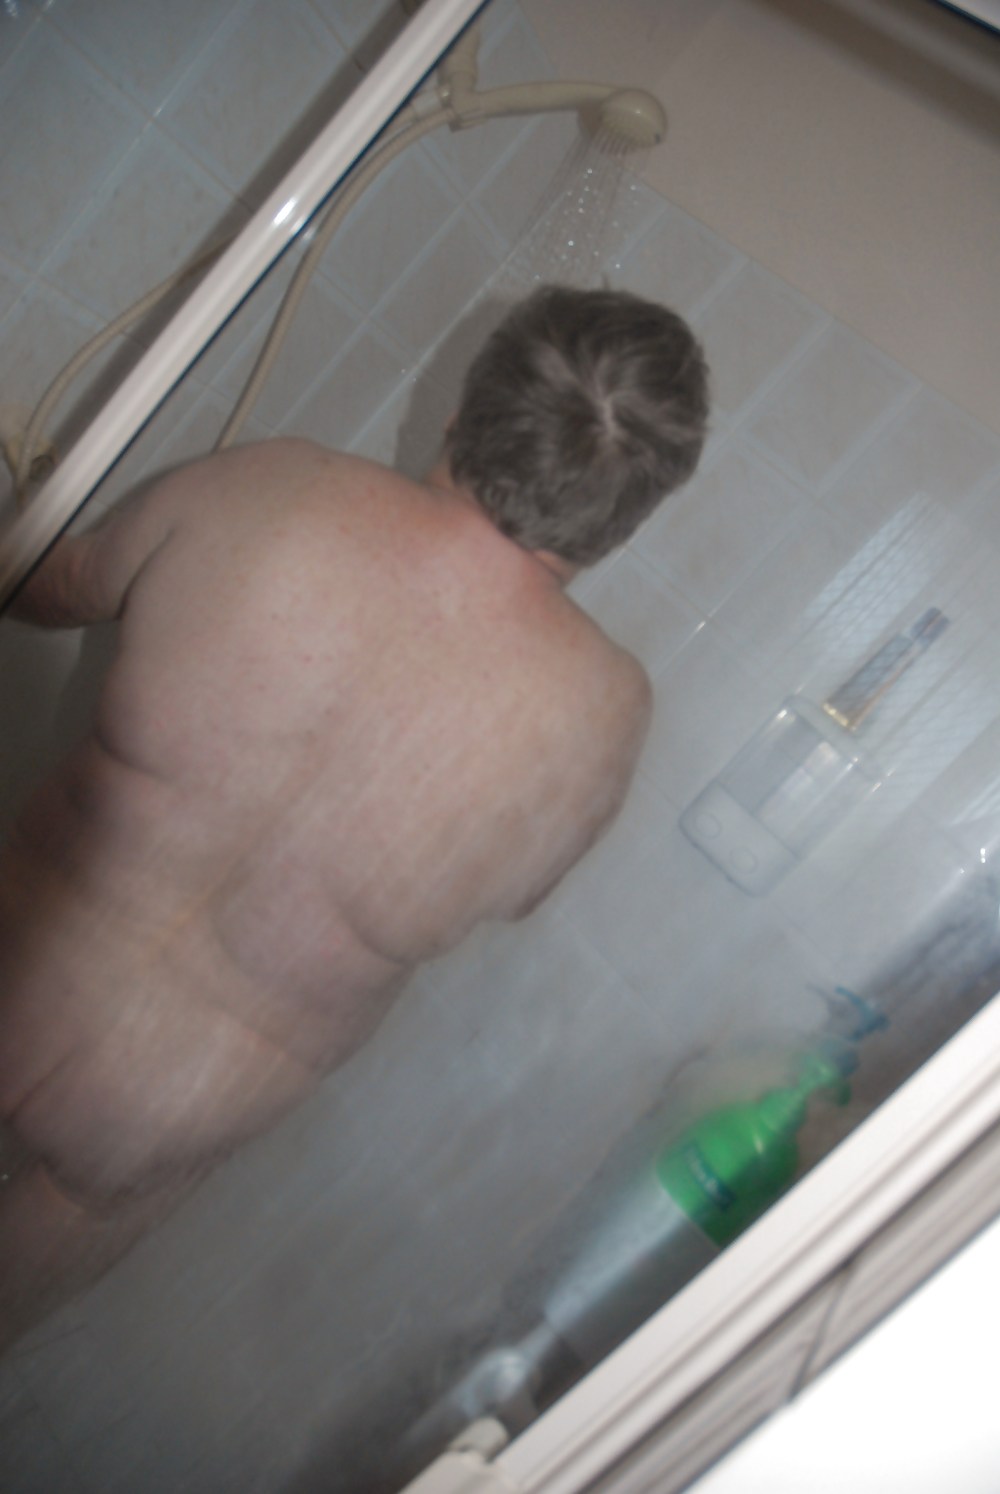 IN THE SHOWER #2209796